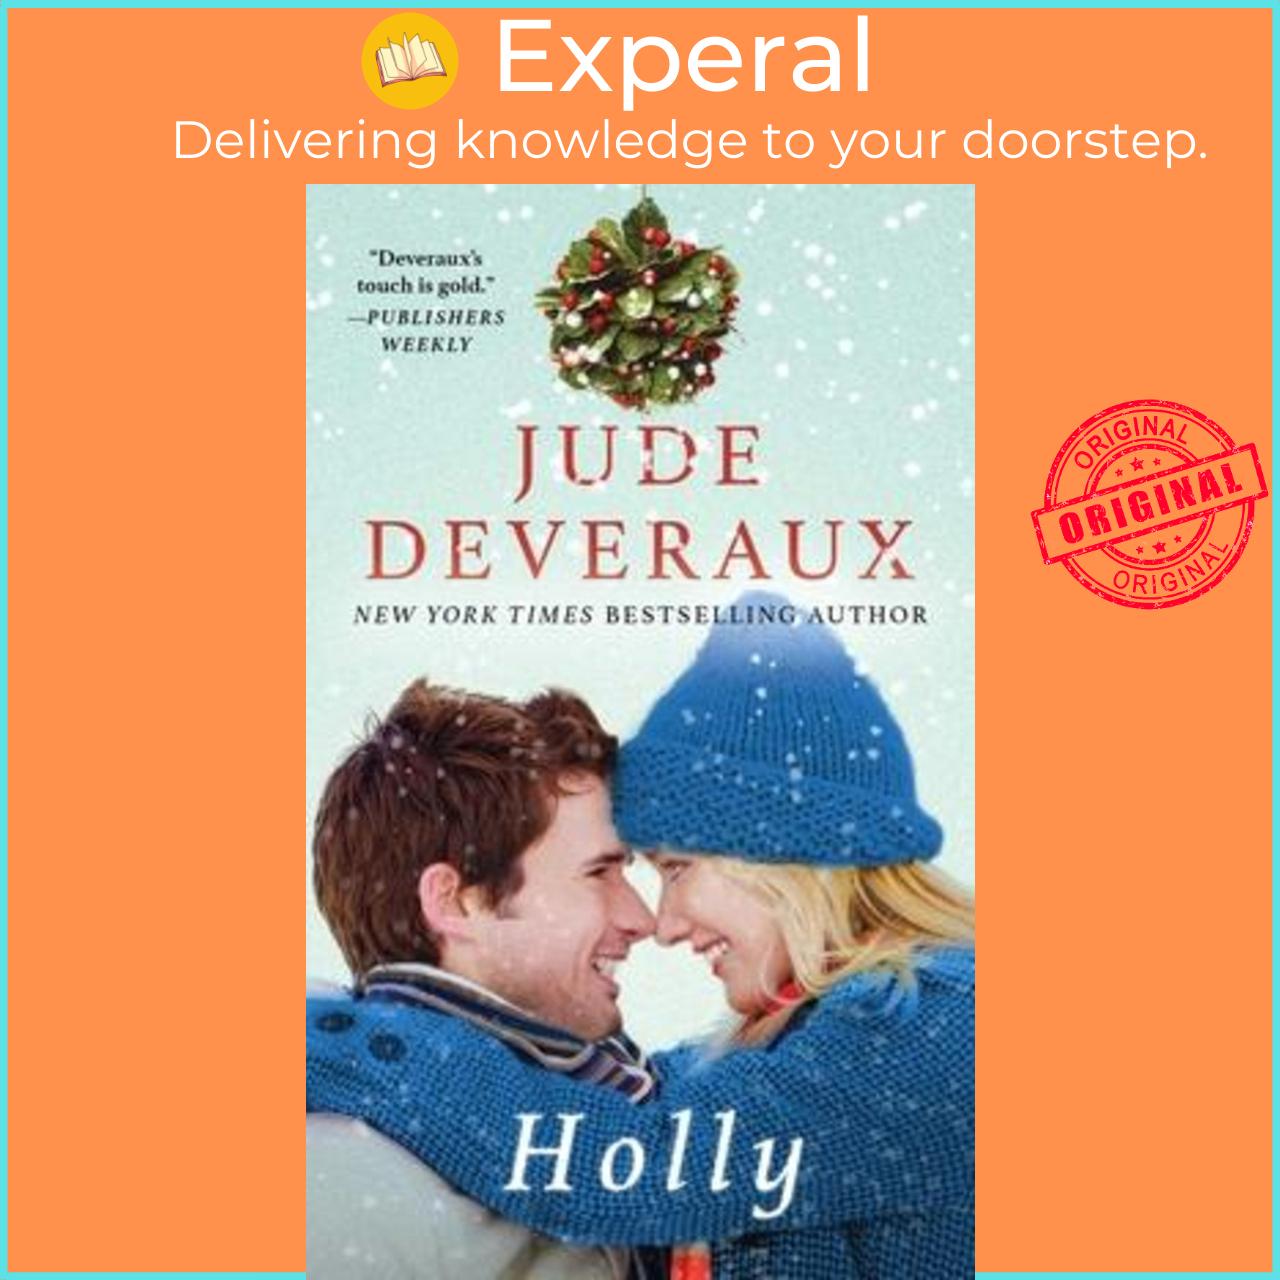 Sách - Holly by Jude Deveraux (US edition, paperback)